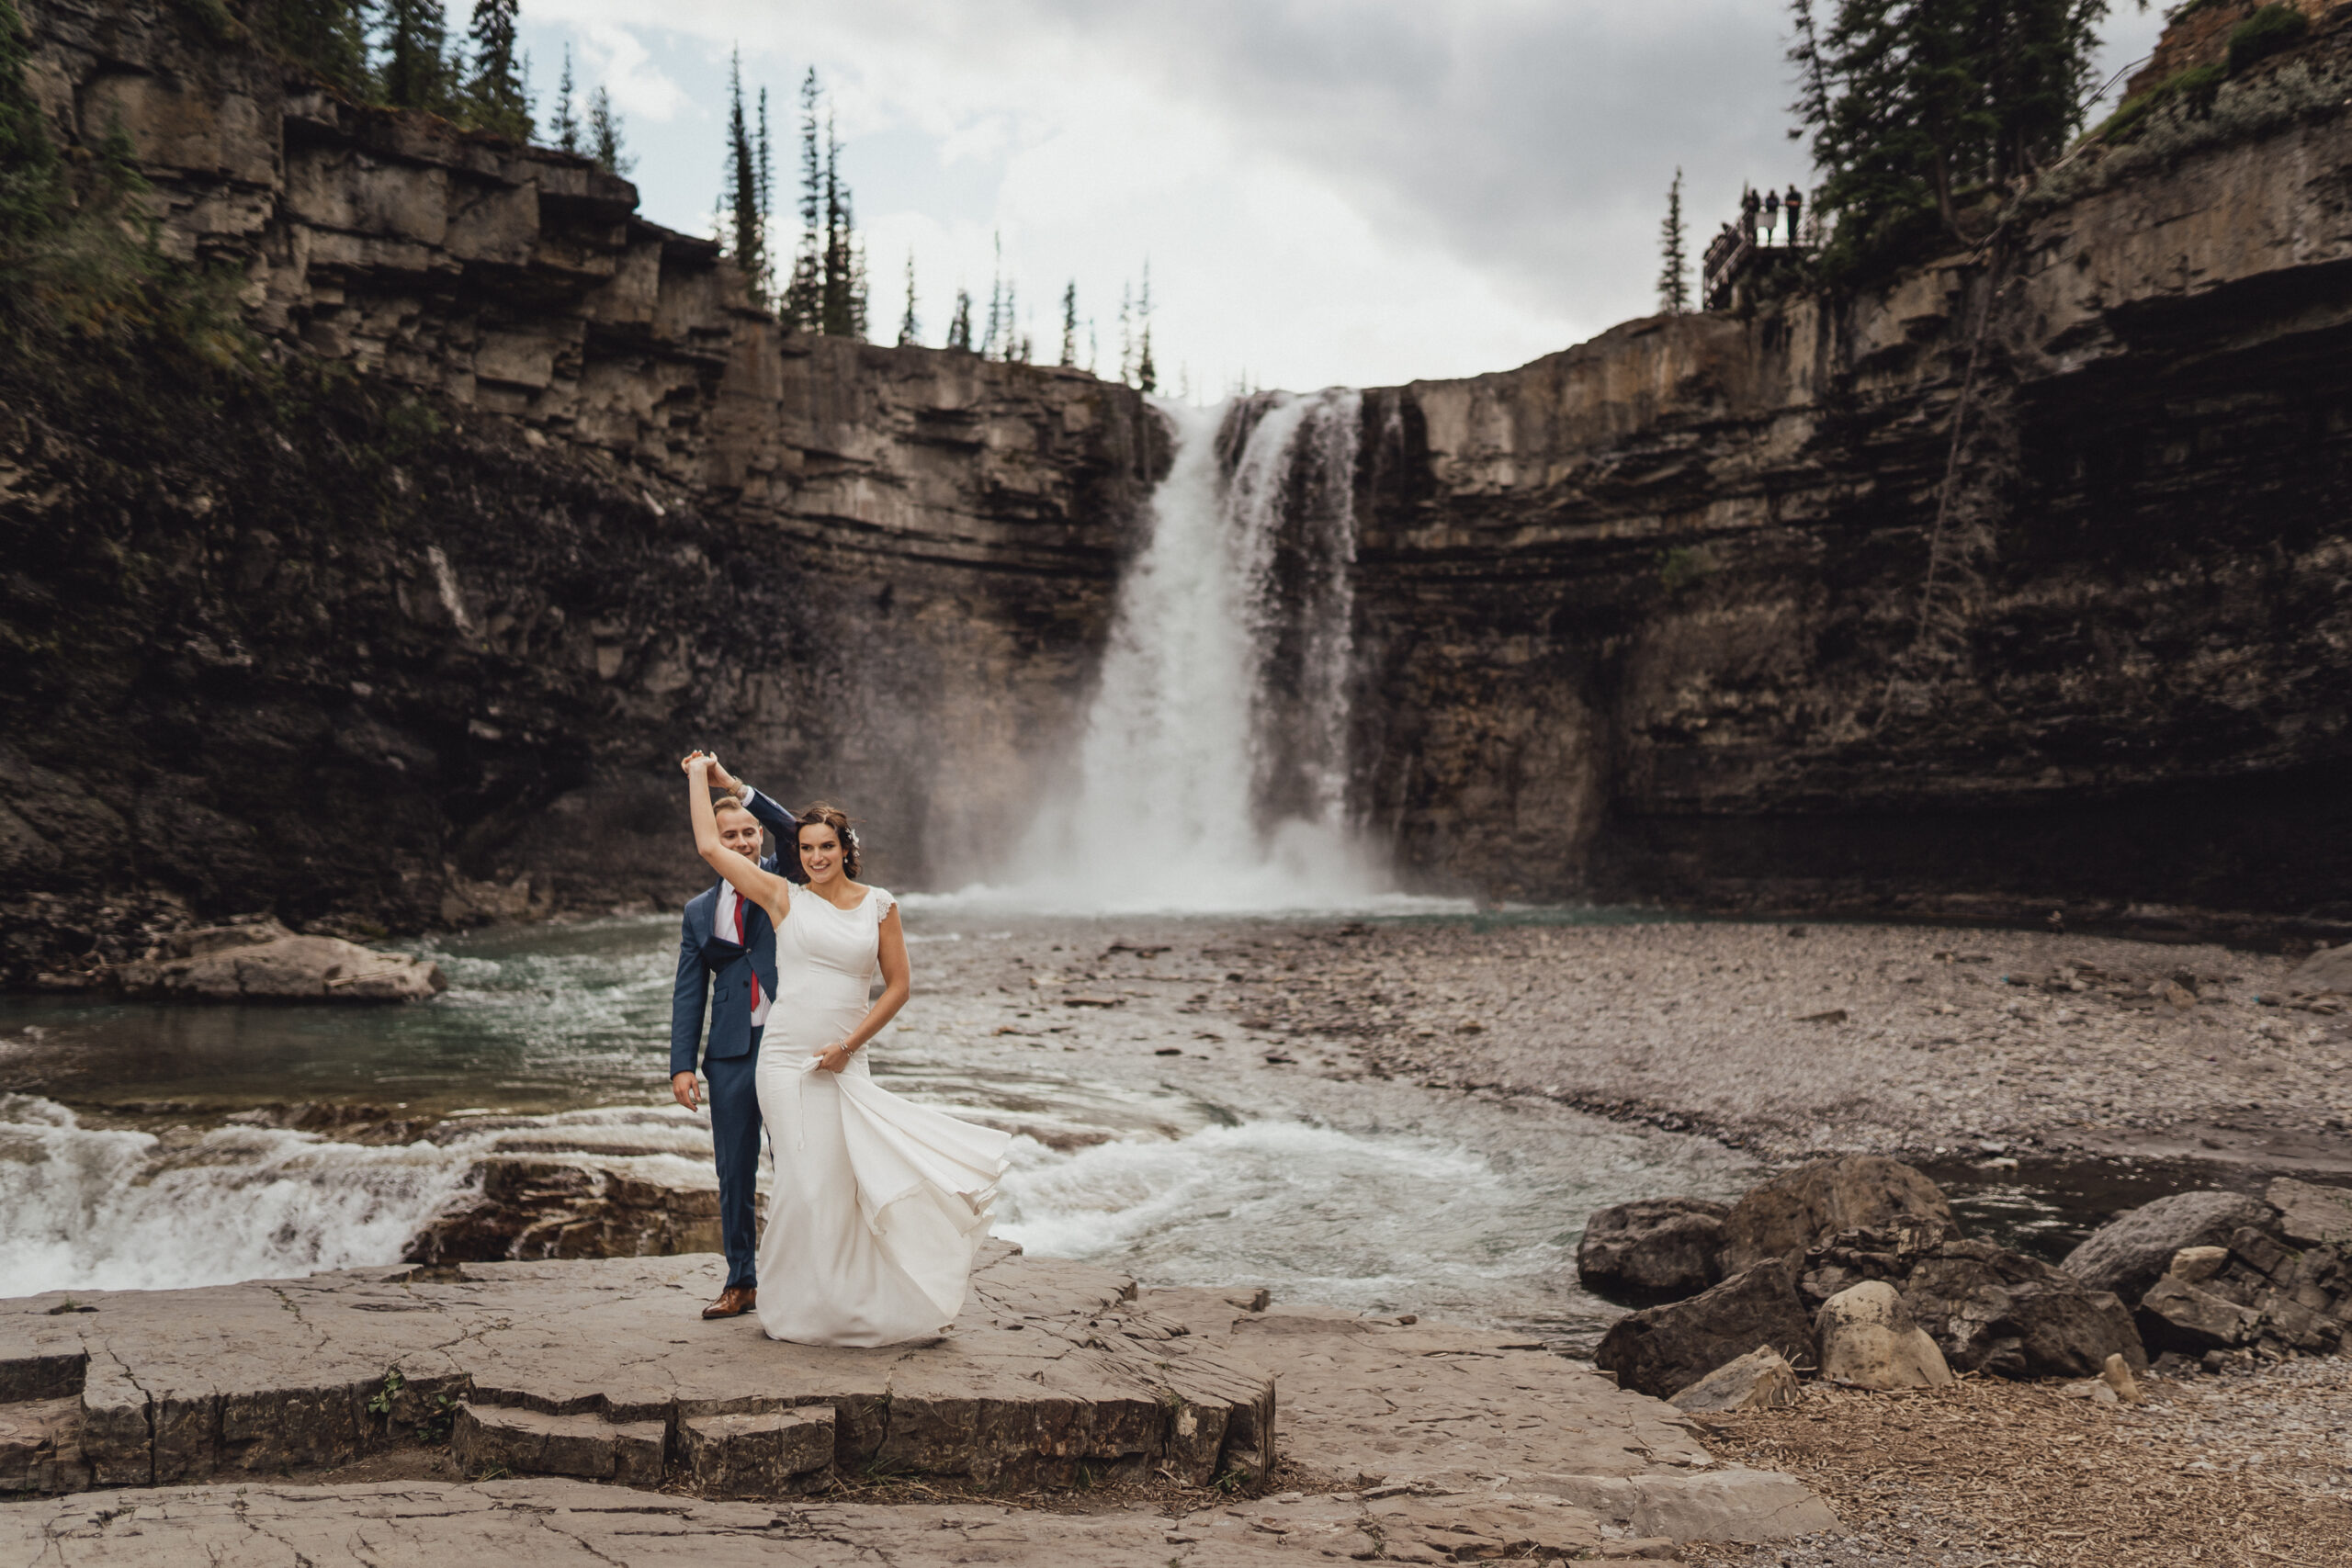 Classic wedding couple dancing in front of waterfall